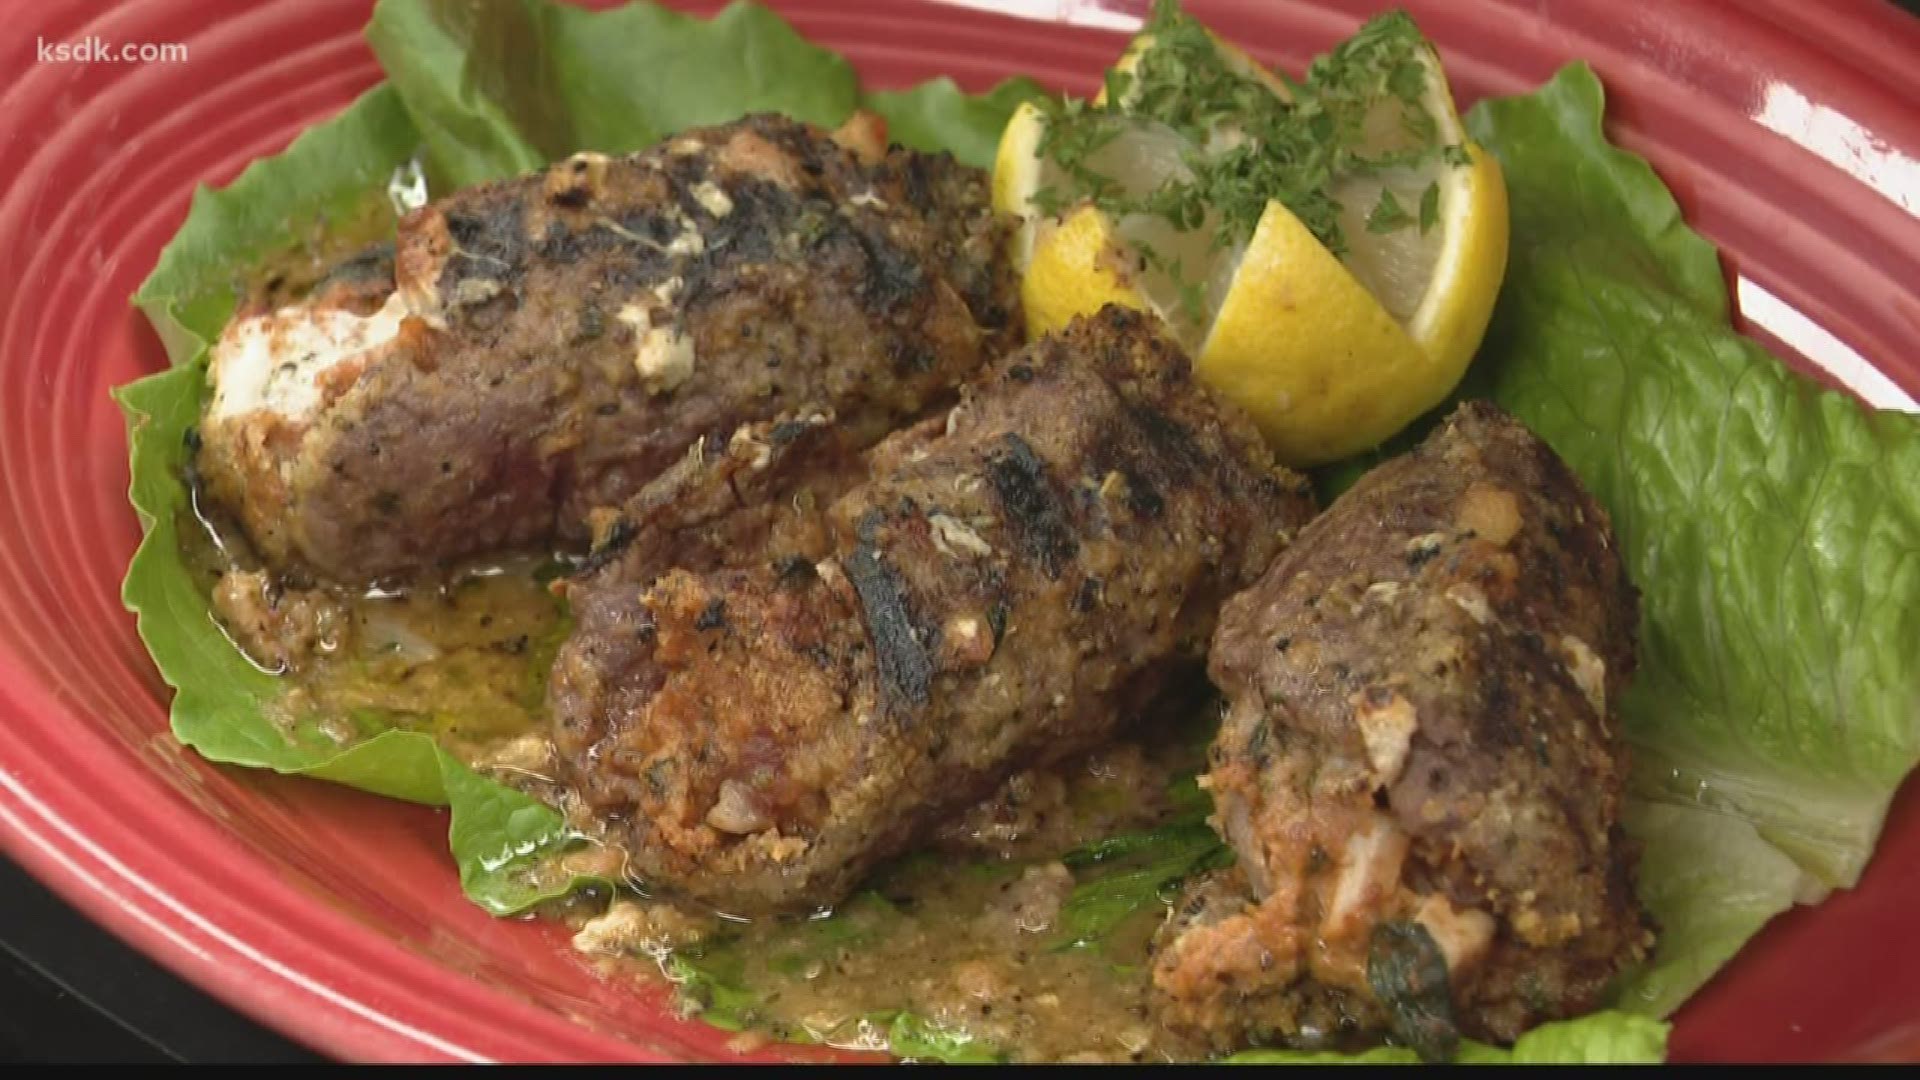 Frank Cusumano stopped by Mungo's in Collinsville for this week's food pick